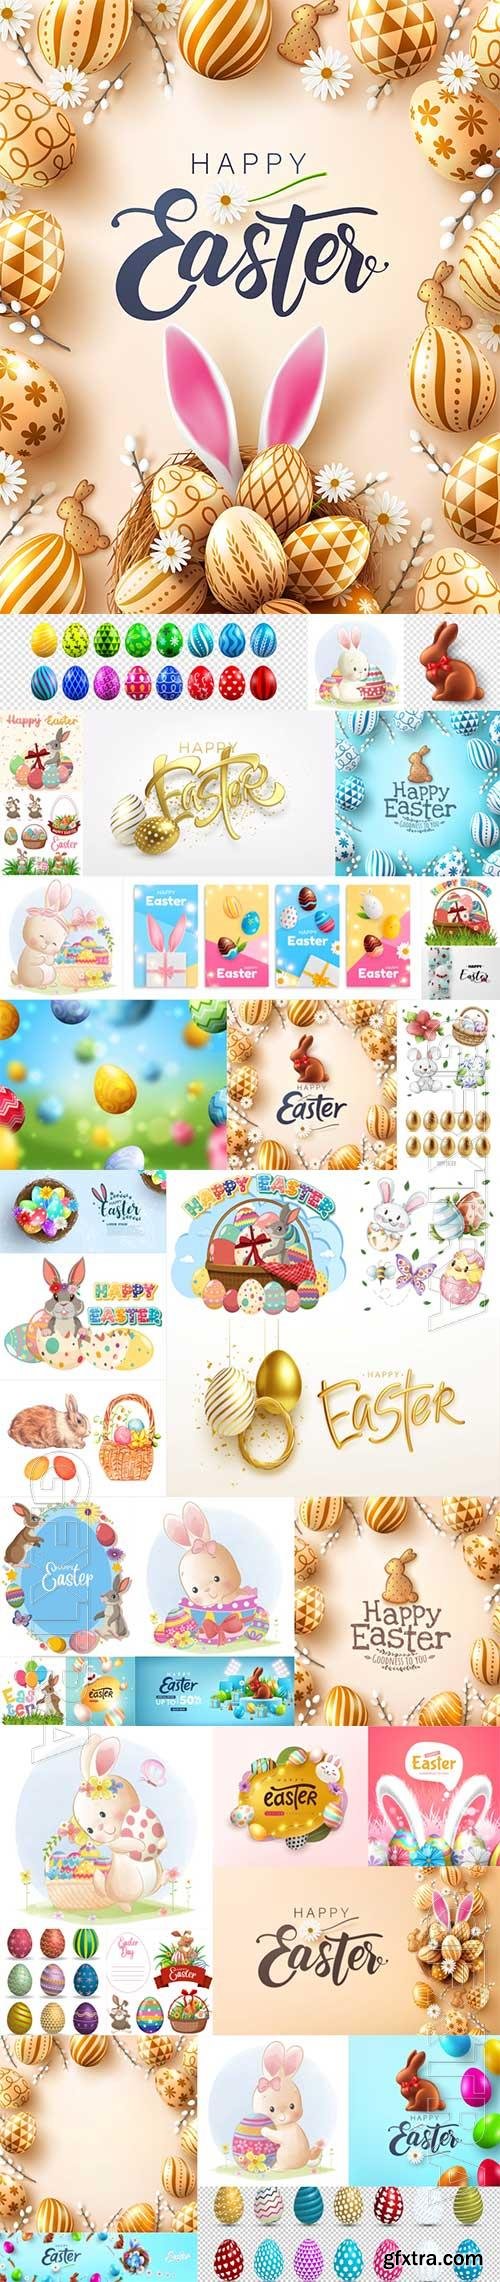 Easter poster and banner template with golden easter eggs in the bunny